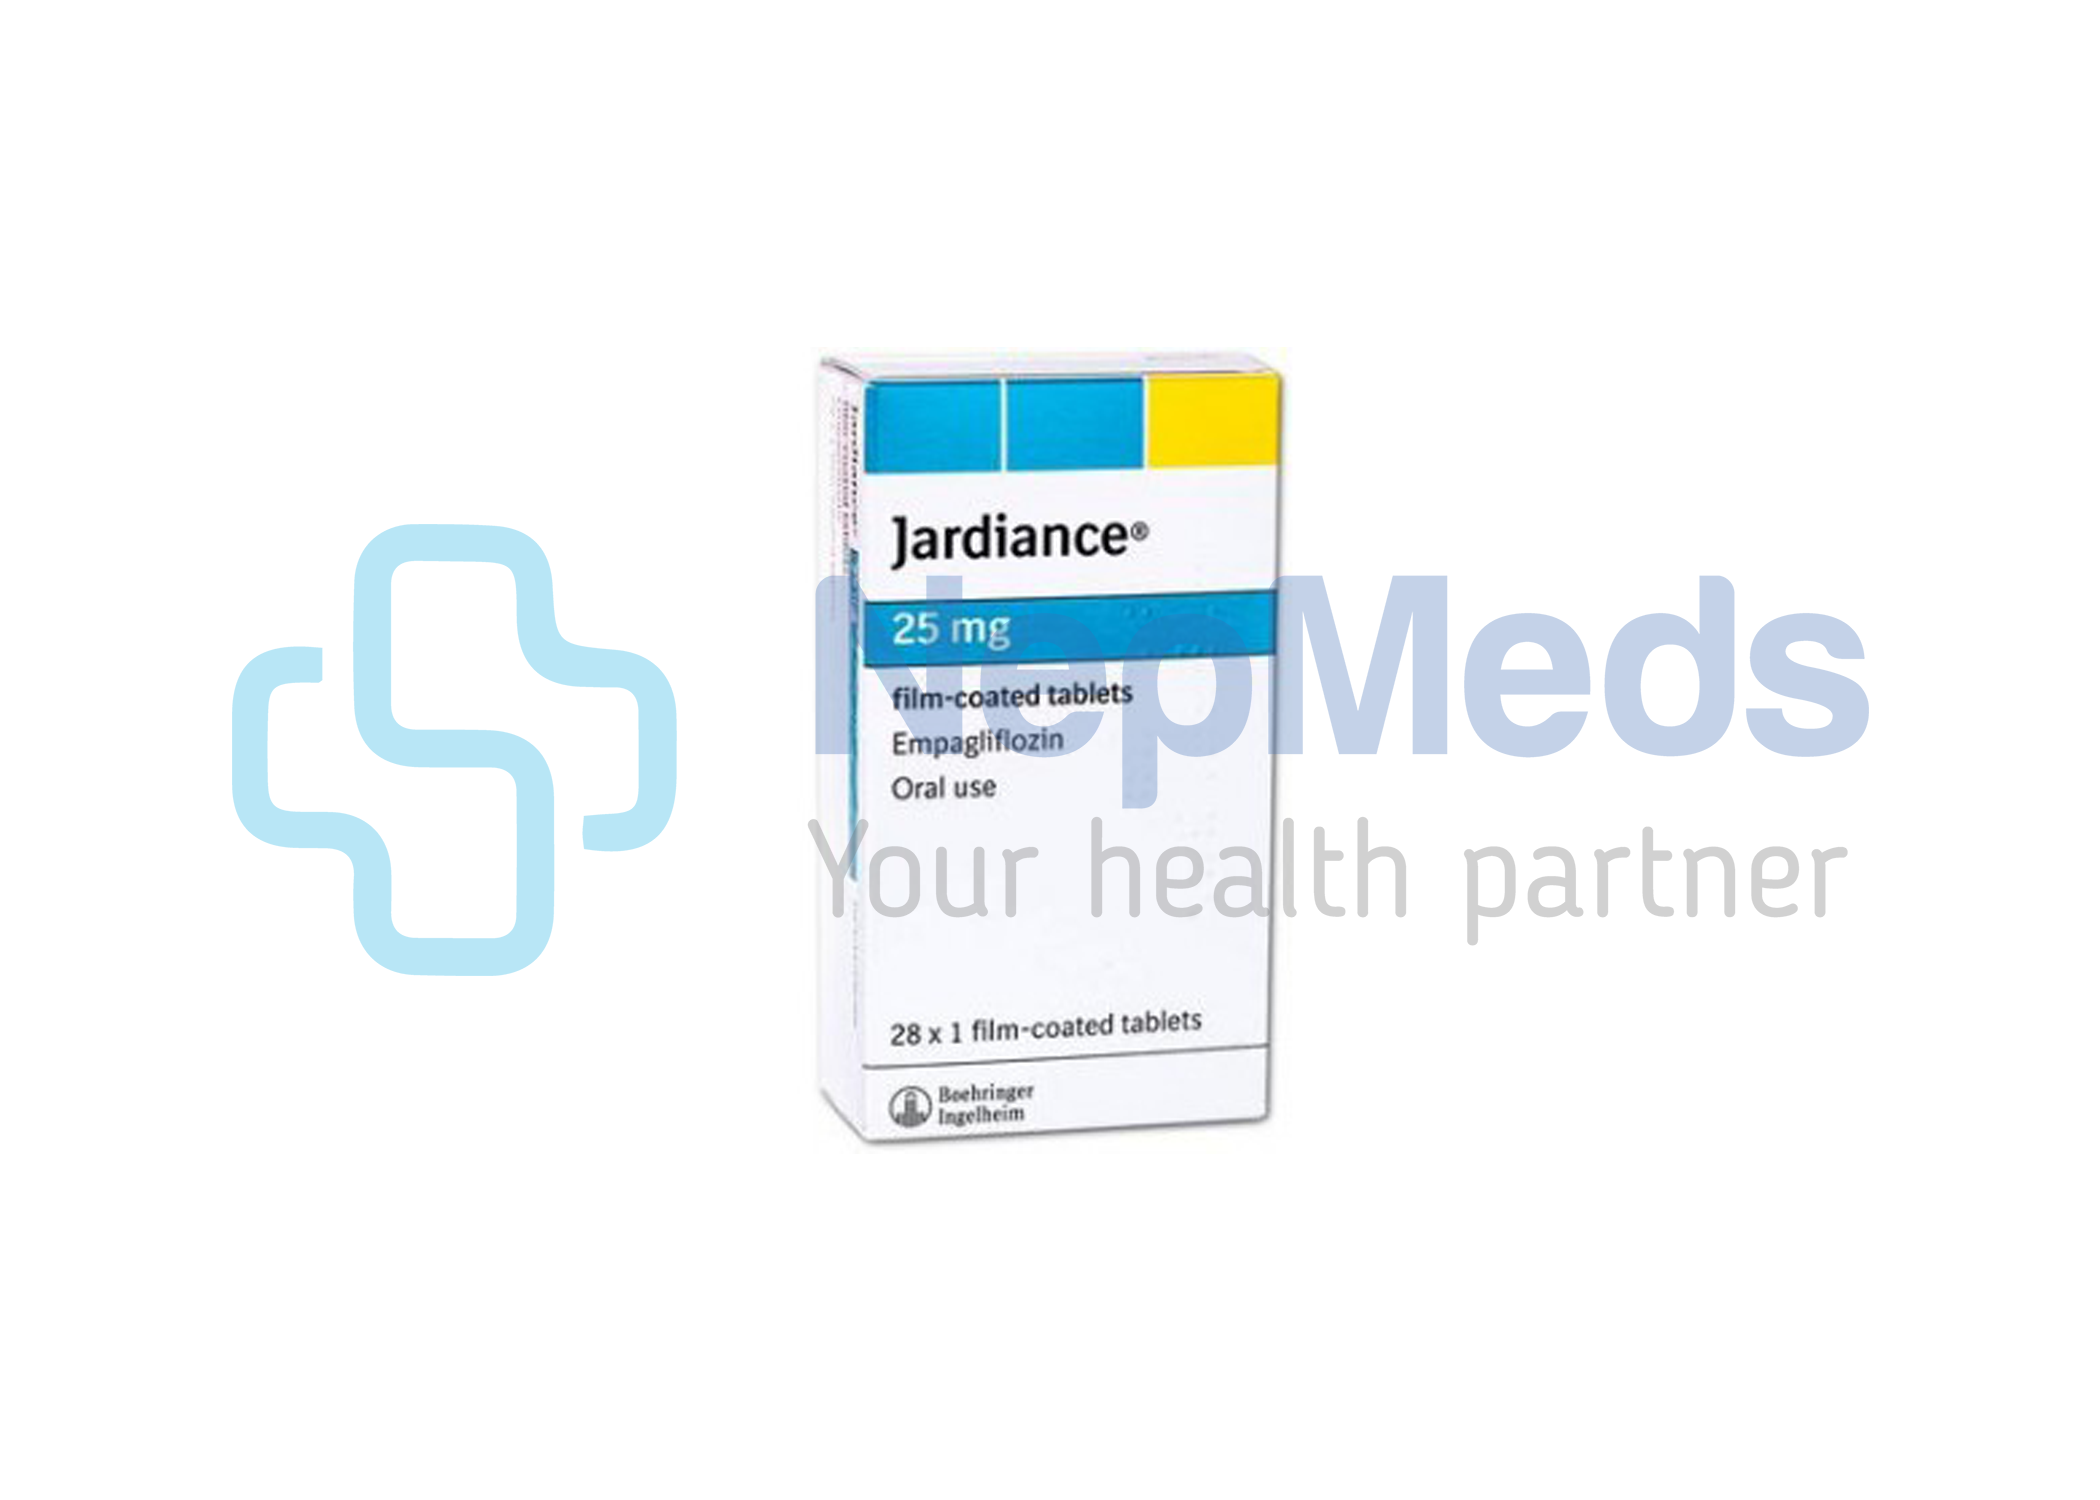 Jardiance 25 mg - Buy Jardiance 25 mg at Best Price in NepMeds